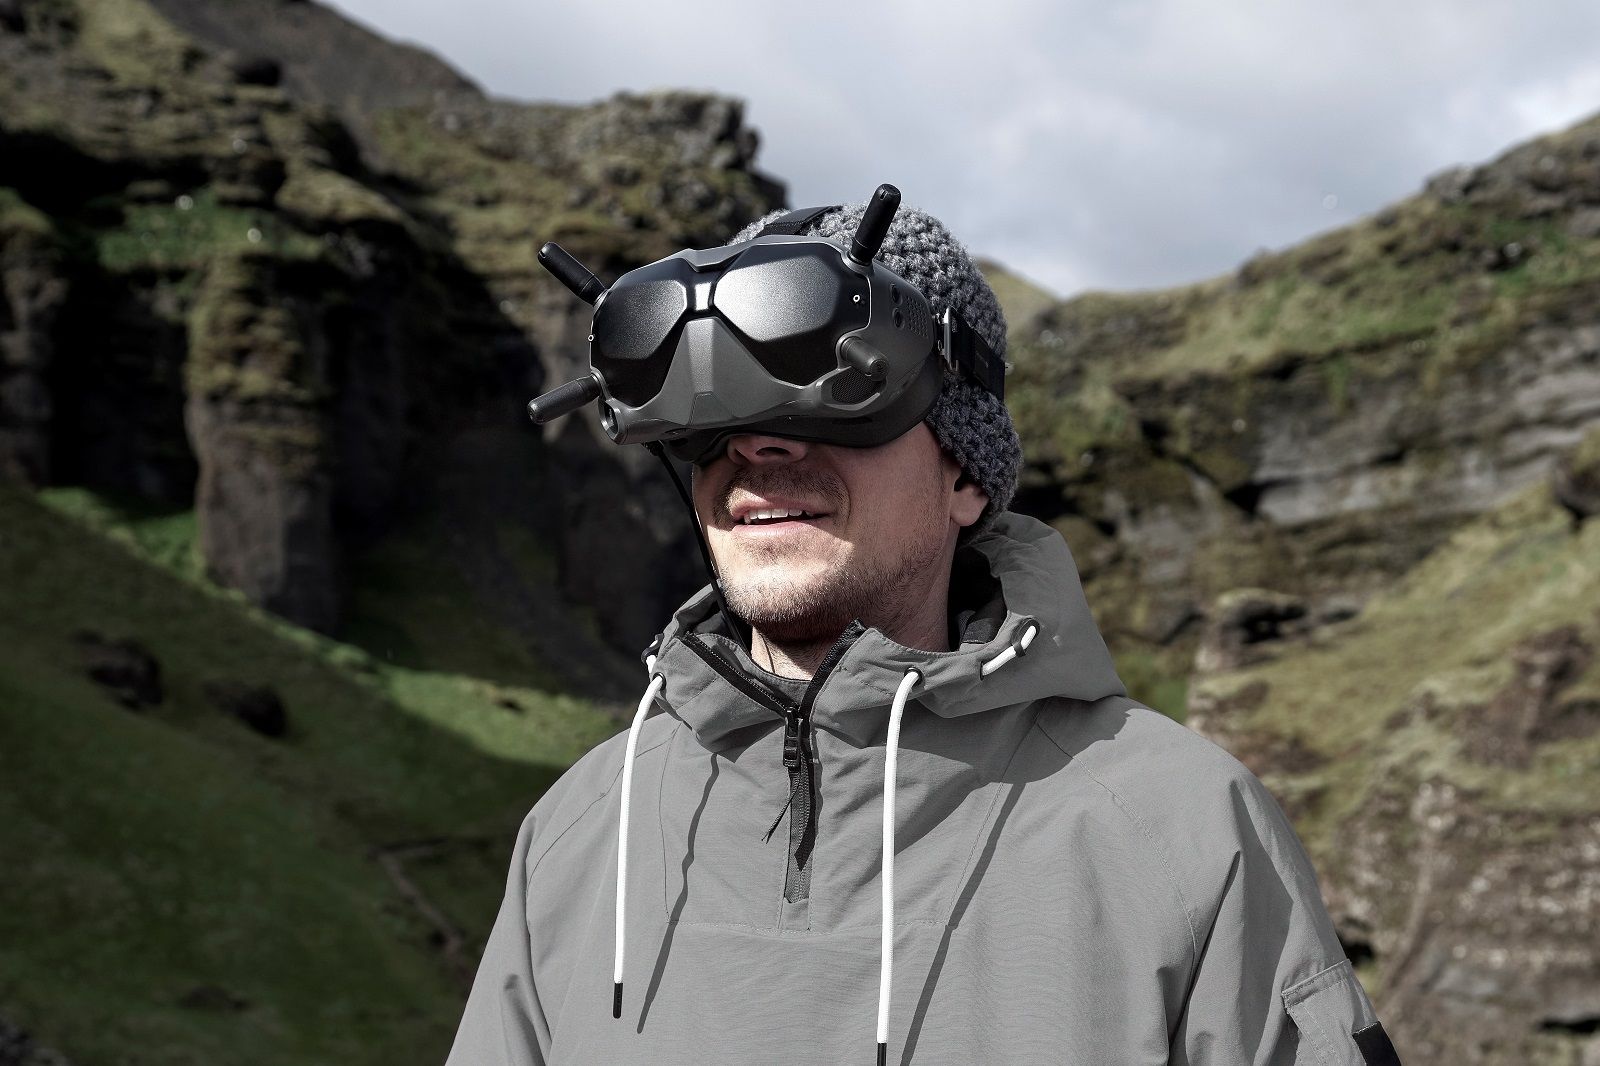 DJI reveals new digital first person view headset for racing drones and more image 1